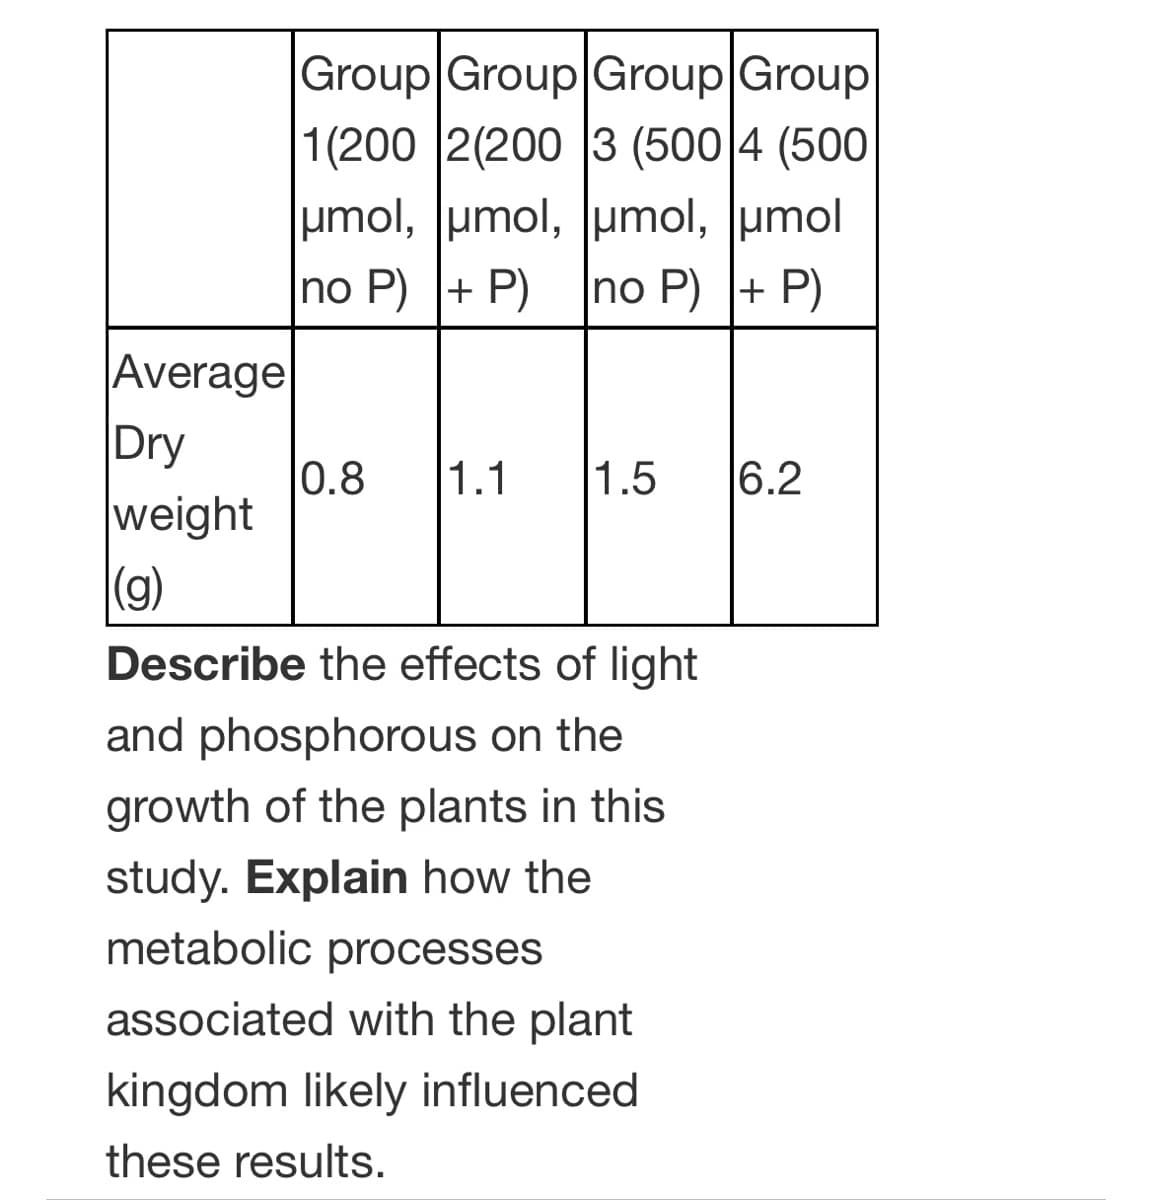 Group Group Group Group
1(200 2(200 3 (500 4 (500
umol, umol, umol, umol
Ino P) |+ P)
|no P) + P)
Average
Dry
1.1
1.5
6.2
0.8
weight
|(g)
Describe the effects of light
and phosphorous on the
growth of the plants in this
study. Explain how the
metabolic processes
associated with the plant
kingdom likely influenced
these results.
